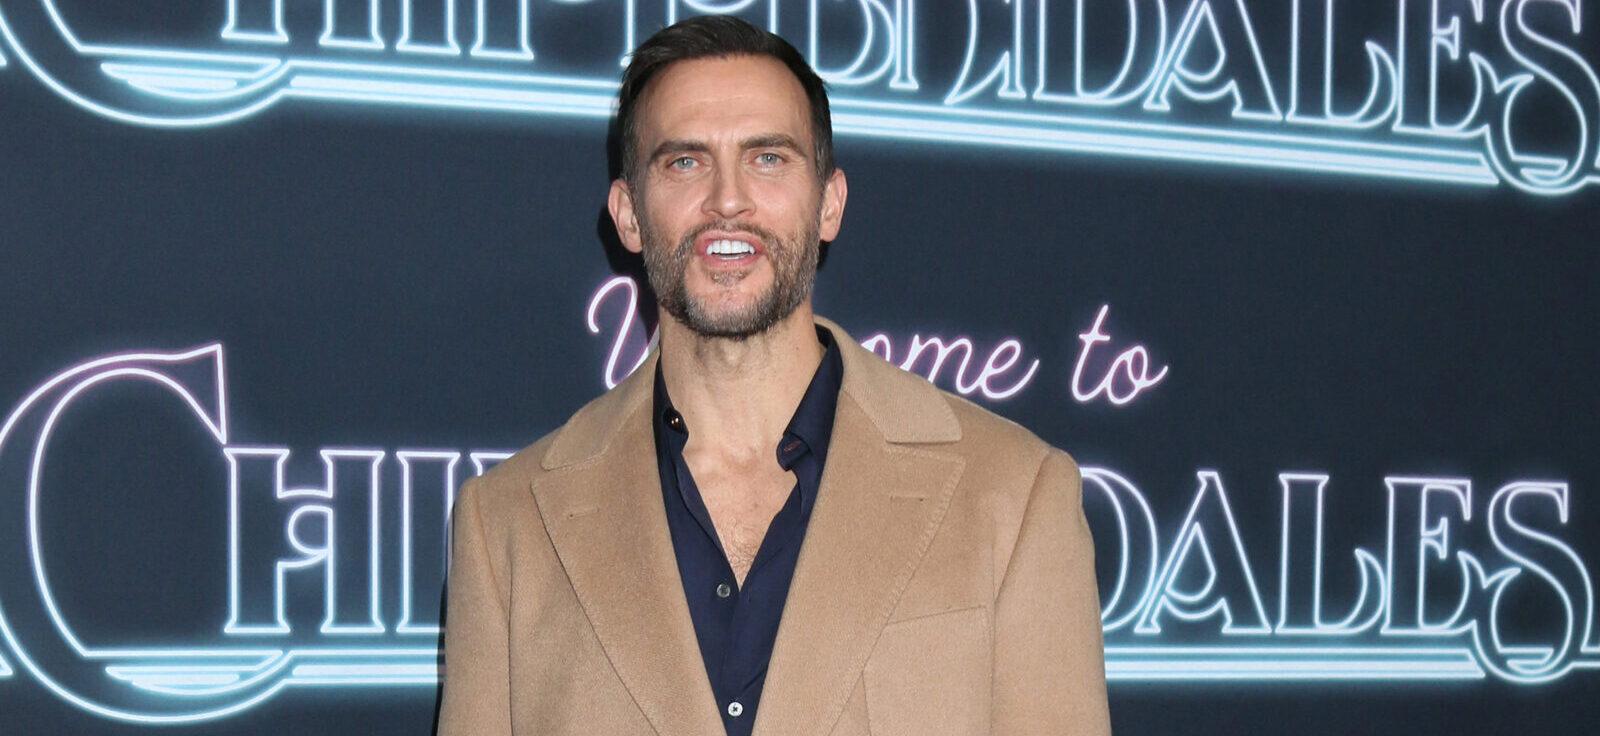 Cheyenne Jackson Admits Relapse After A Decade Of Sobriety, Opens Up About Struggle With Alcohol